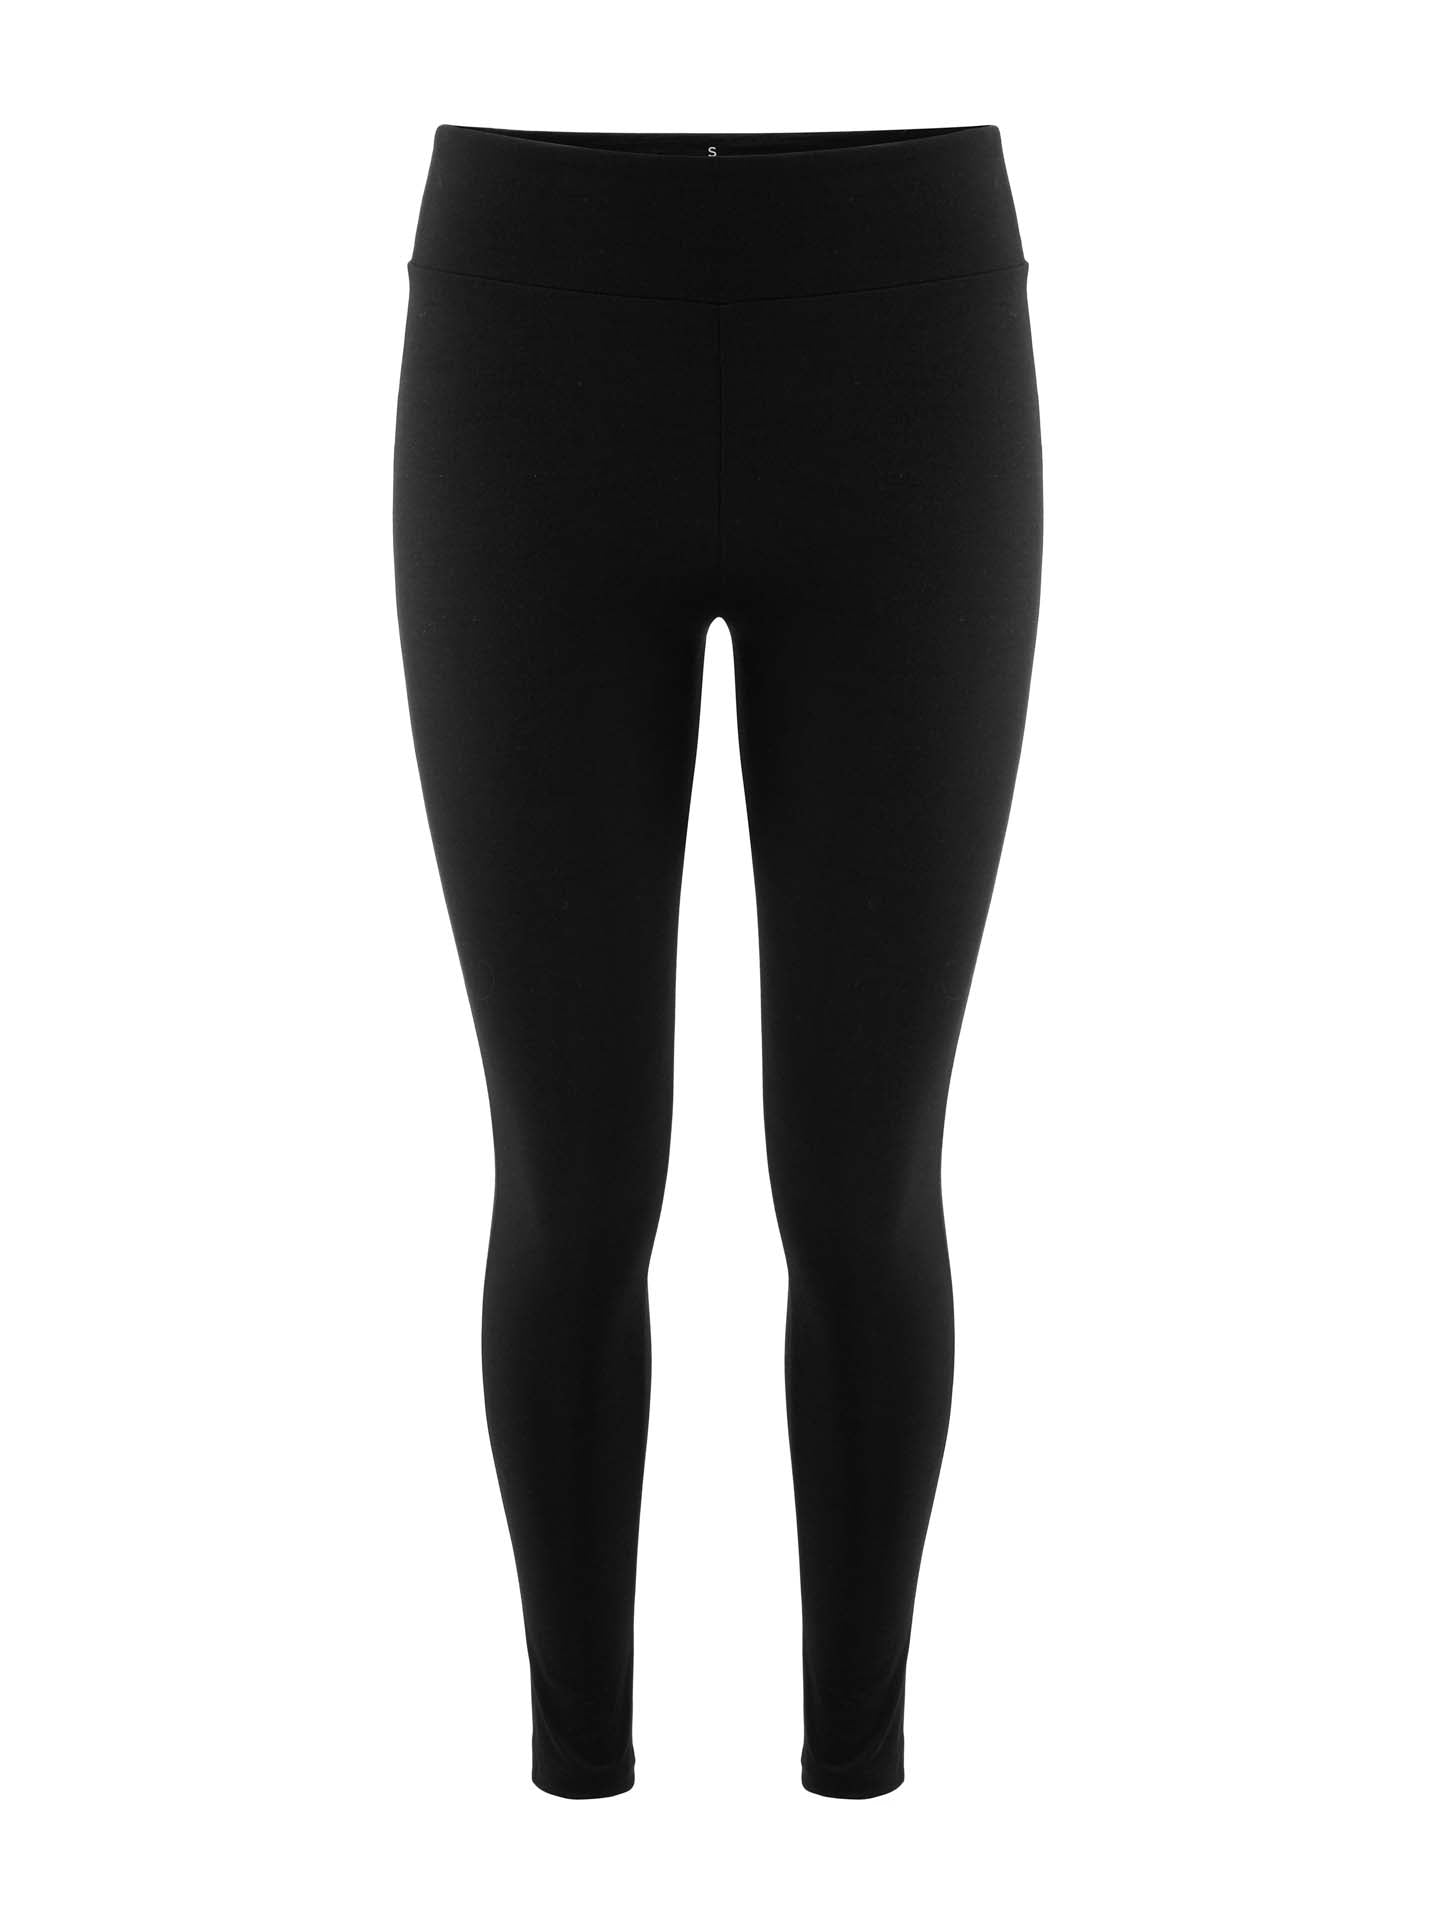 Buy Animal Piste Womens Black Thermal Leggings from Next Luxembourg